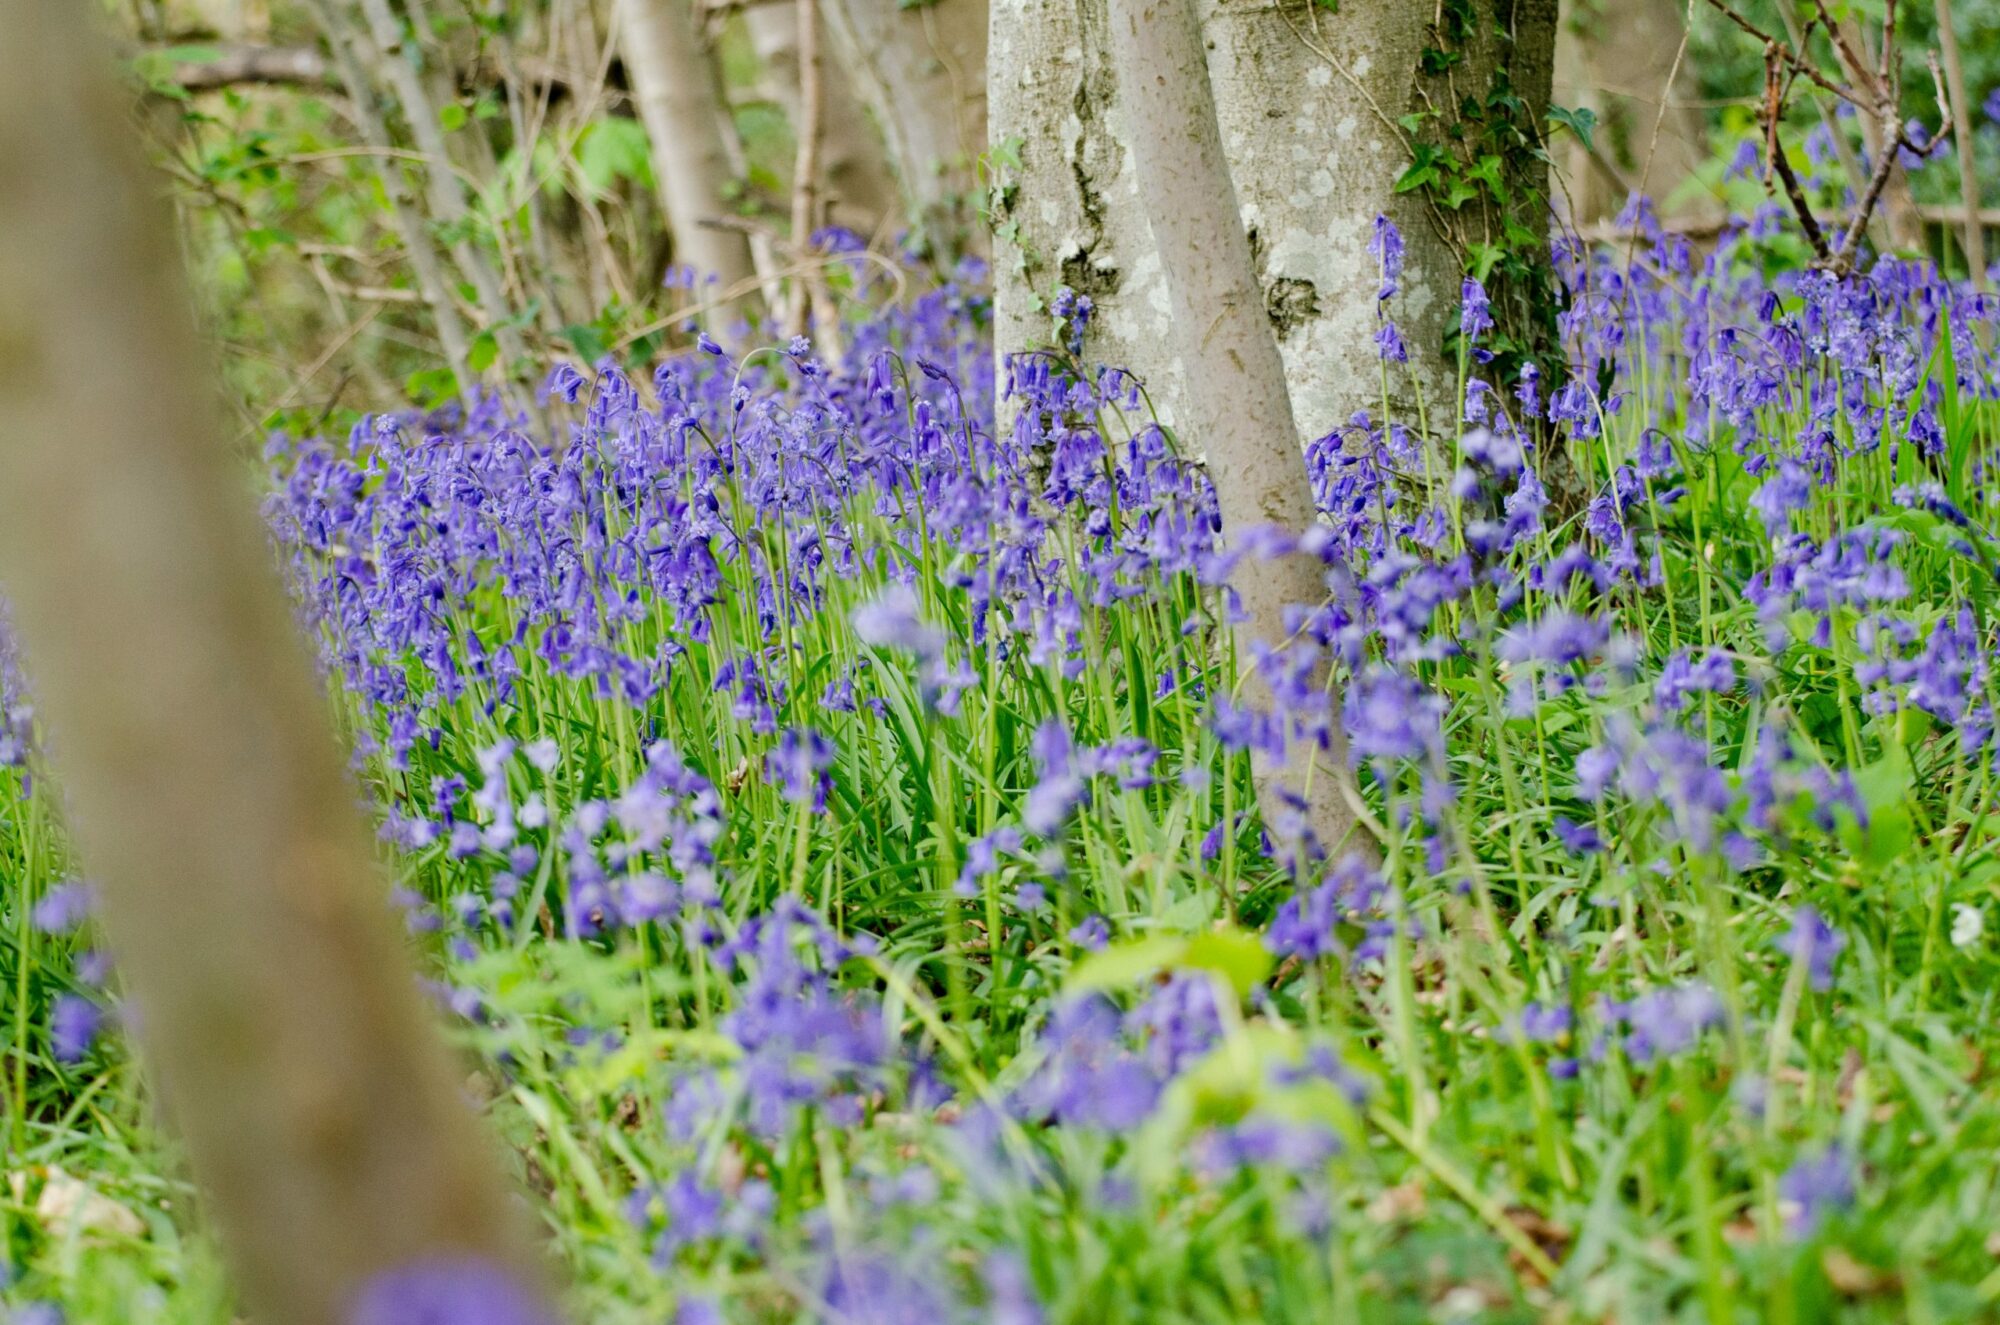 Image name Bluebells Josh Raper Conservation Media 5 scaled 1 the 21 image from the post Walking, Wellbeing and Wildlife in Yorkshire.com.